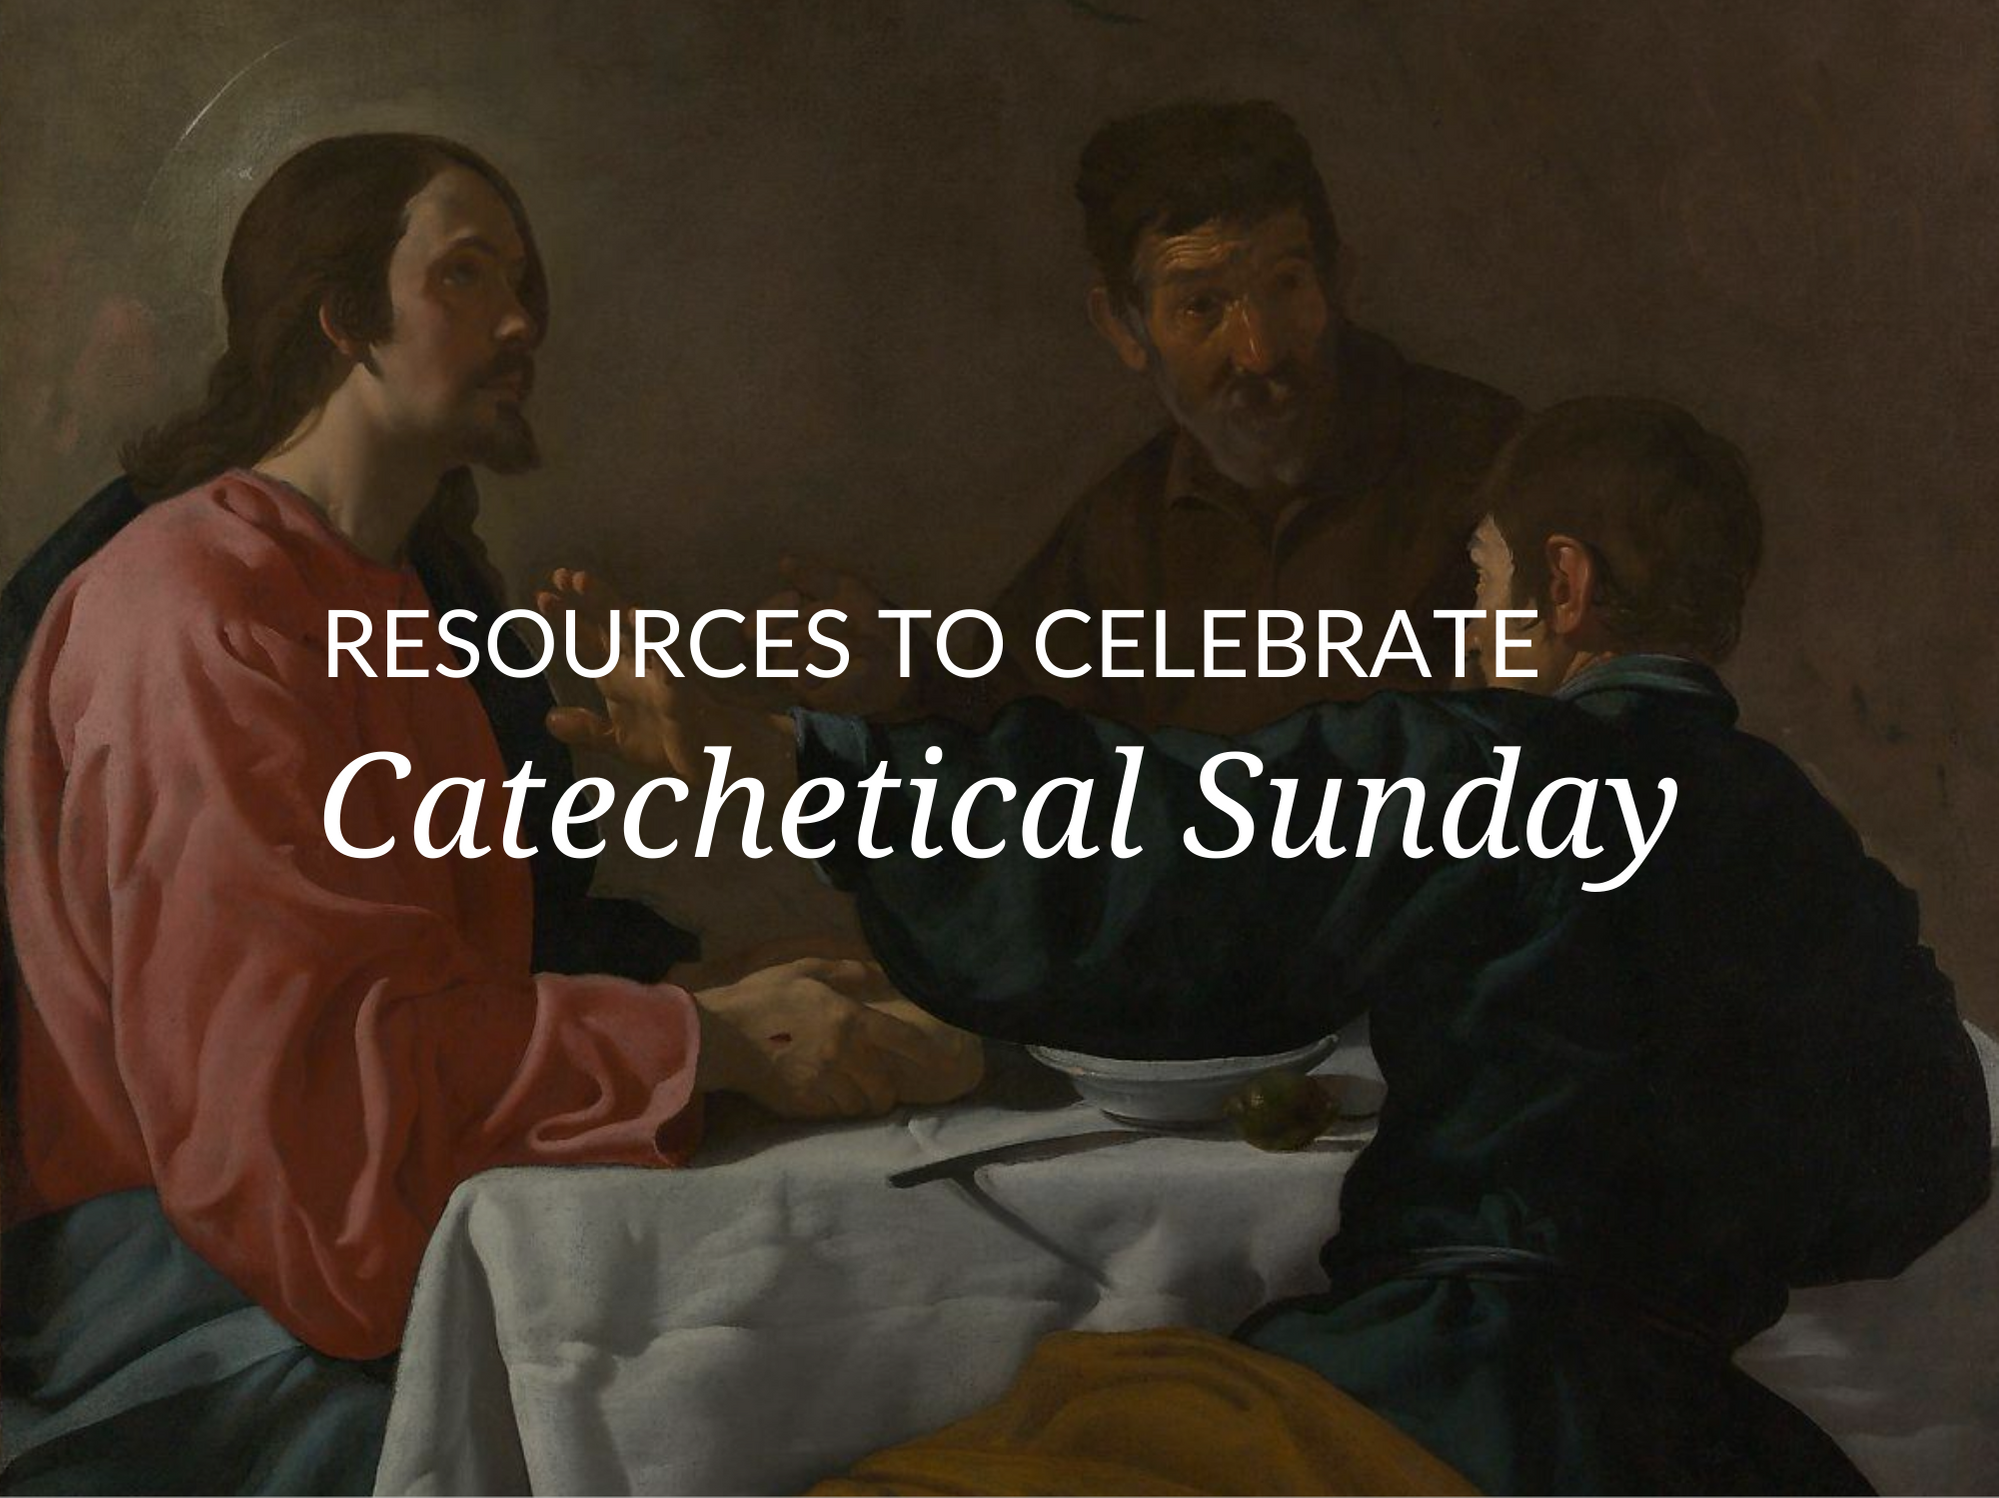 Resources To Celebrate Catechetical Sunday 2020 #keepProtocol